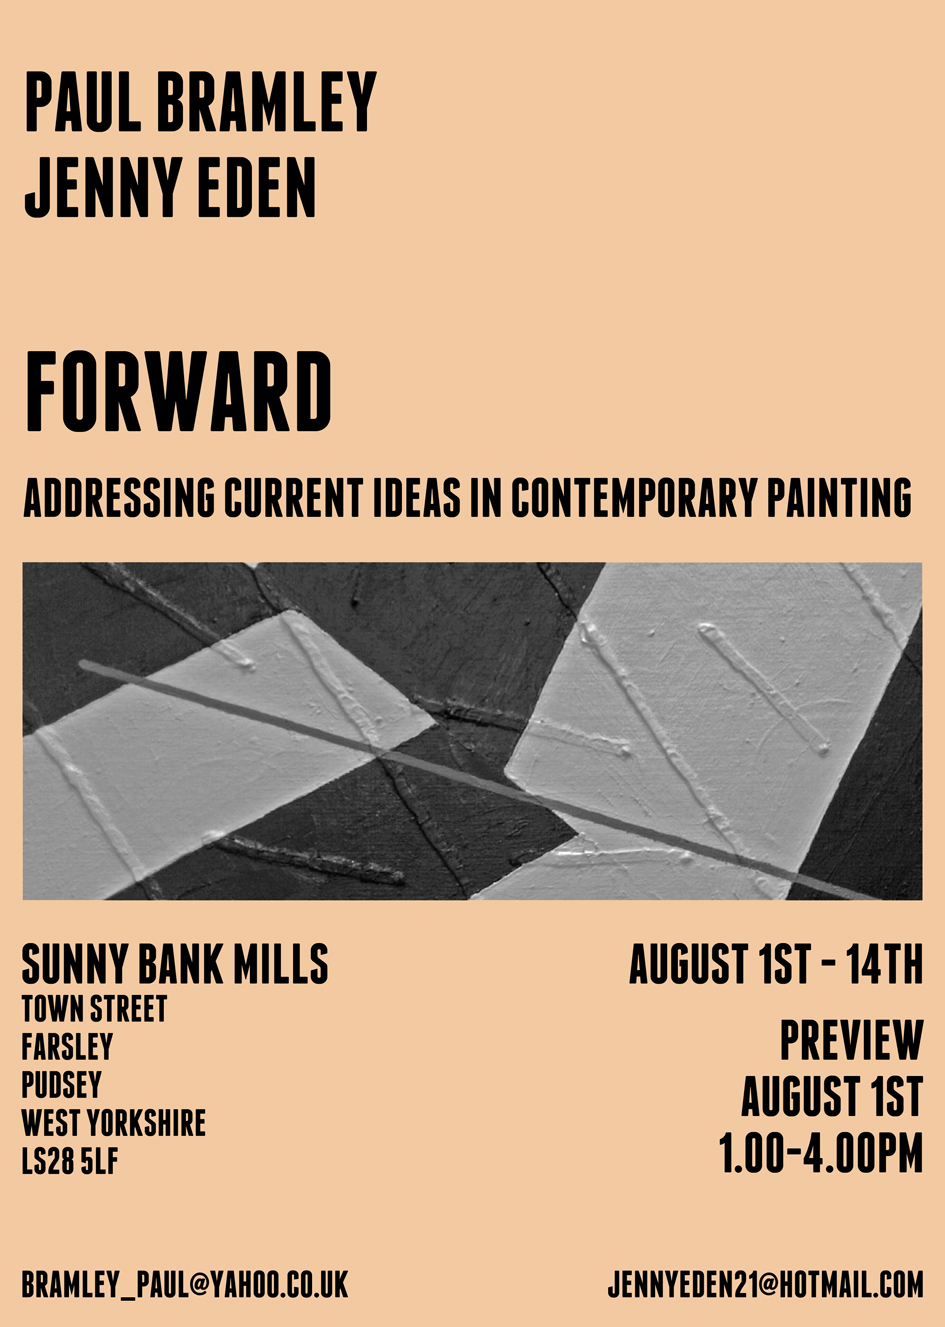 A poster or flyer for 'Forward' addresing ideas in contemporary painting. The poster is peach with black text.